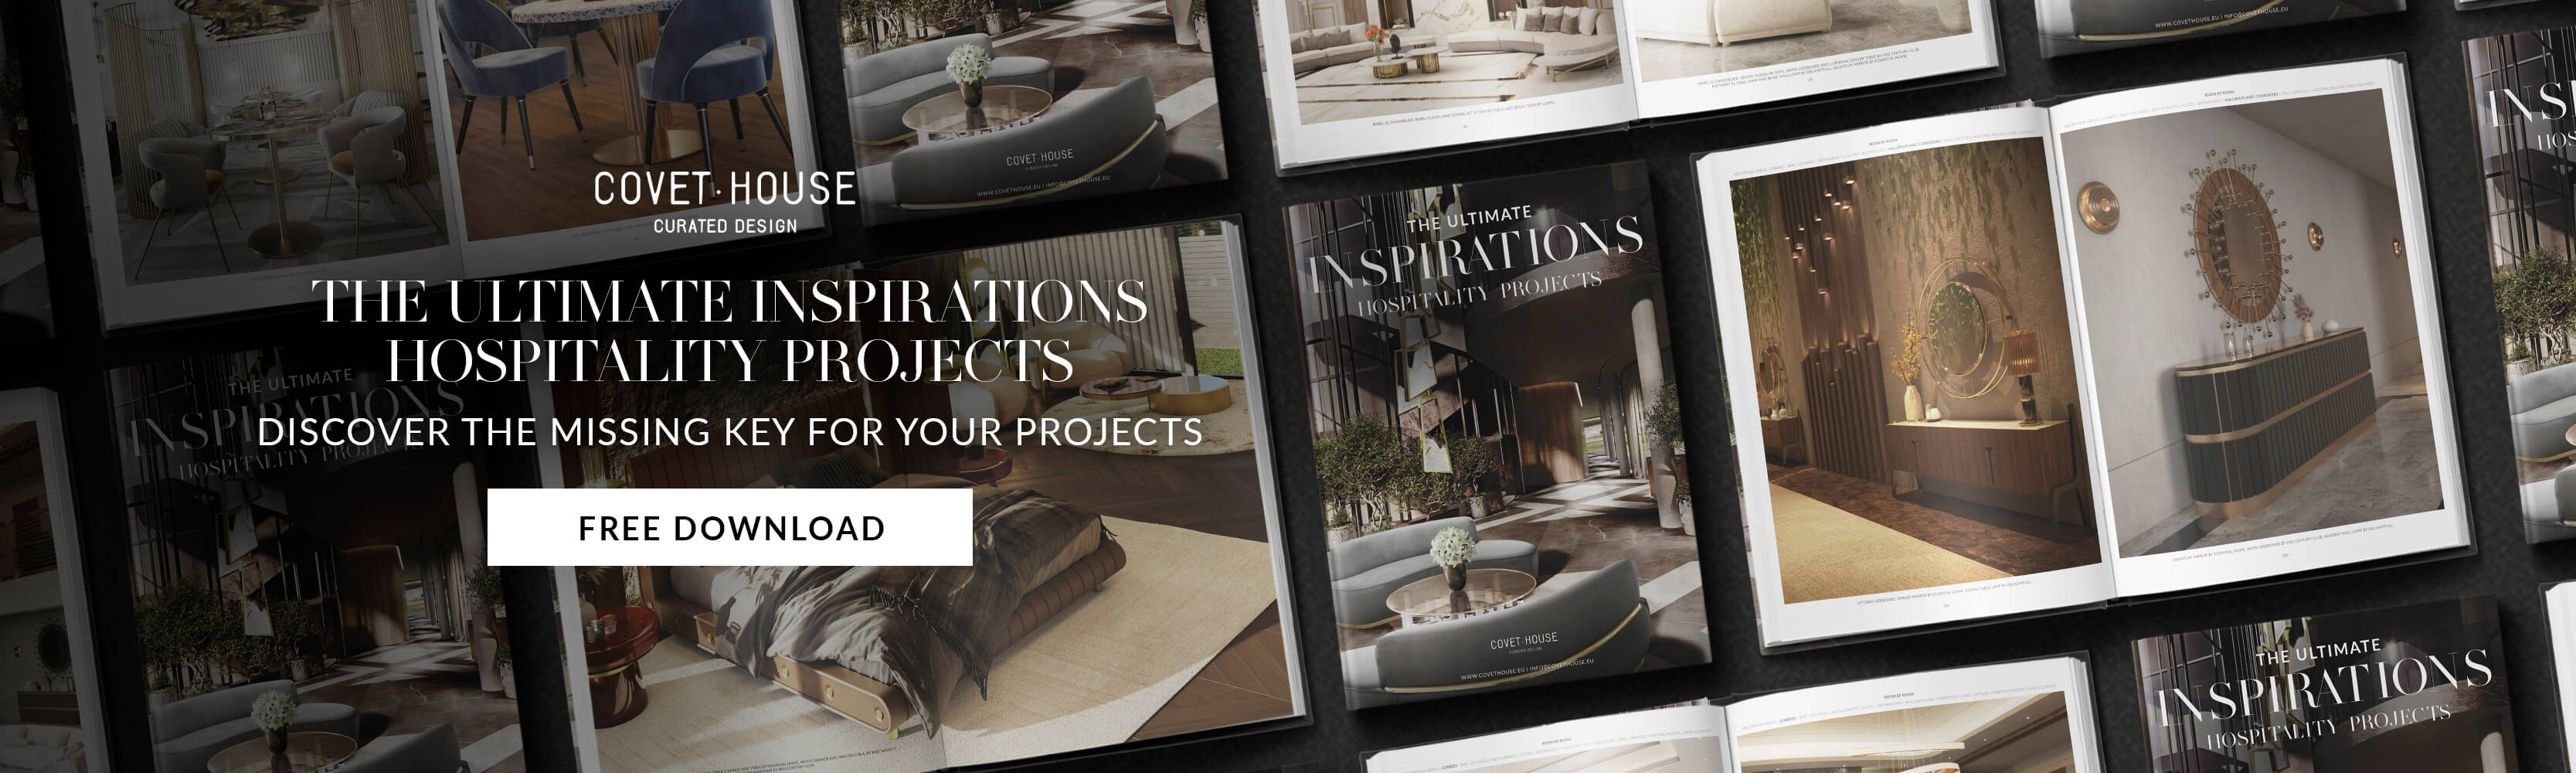 Covet House Inspirations Hospitality Projects